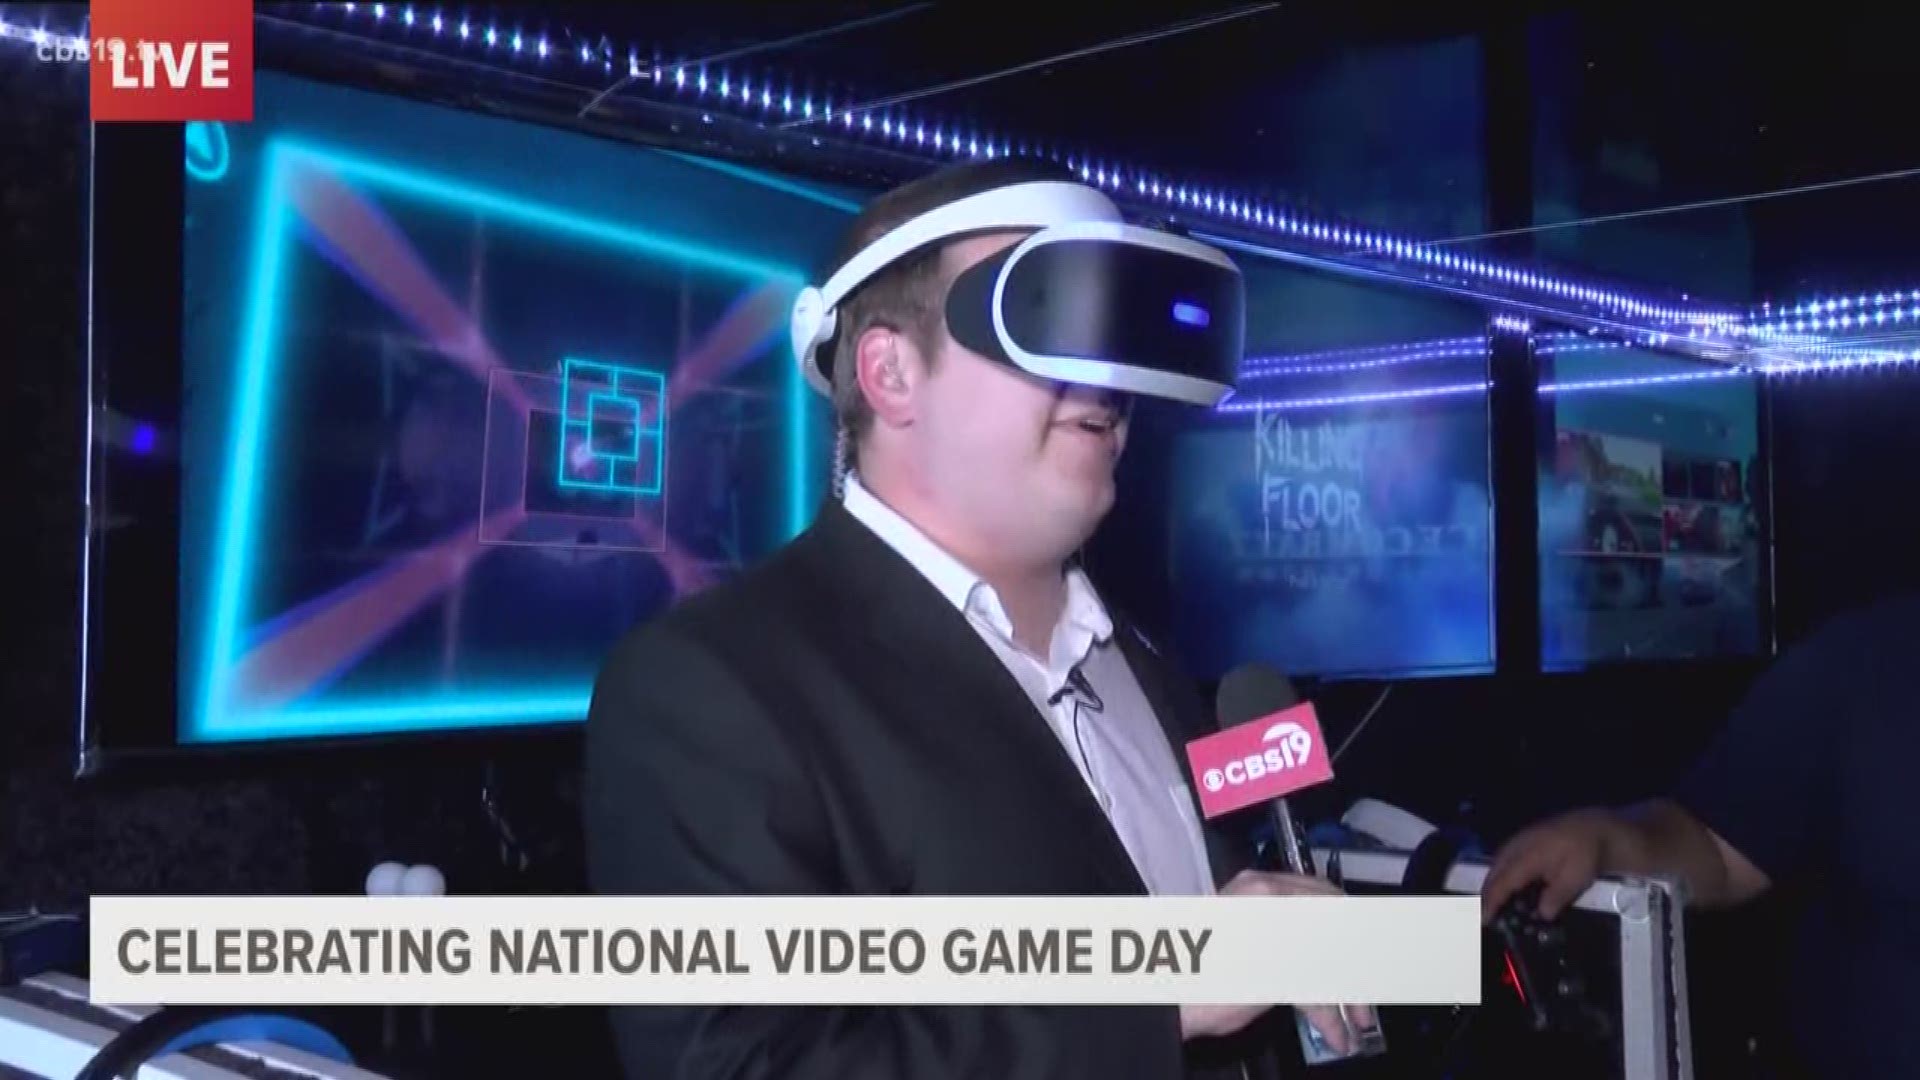 Today is National Video Game Day and what better way to celebrate than by gaming during the Noon Show! Meteorologist Michael Behrens checks out this VR truck located in East Texas!